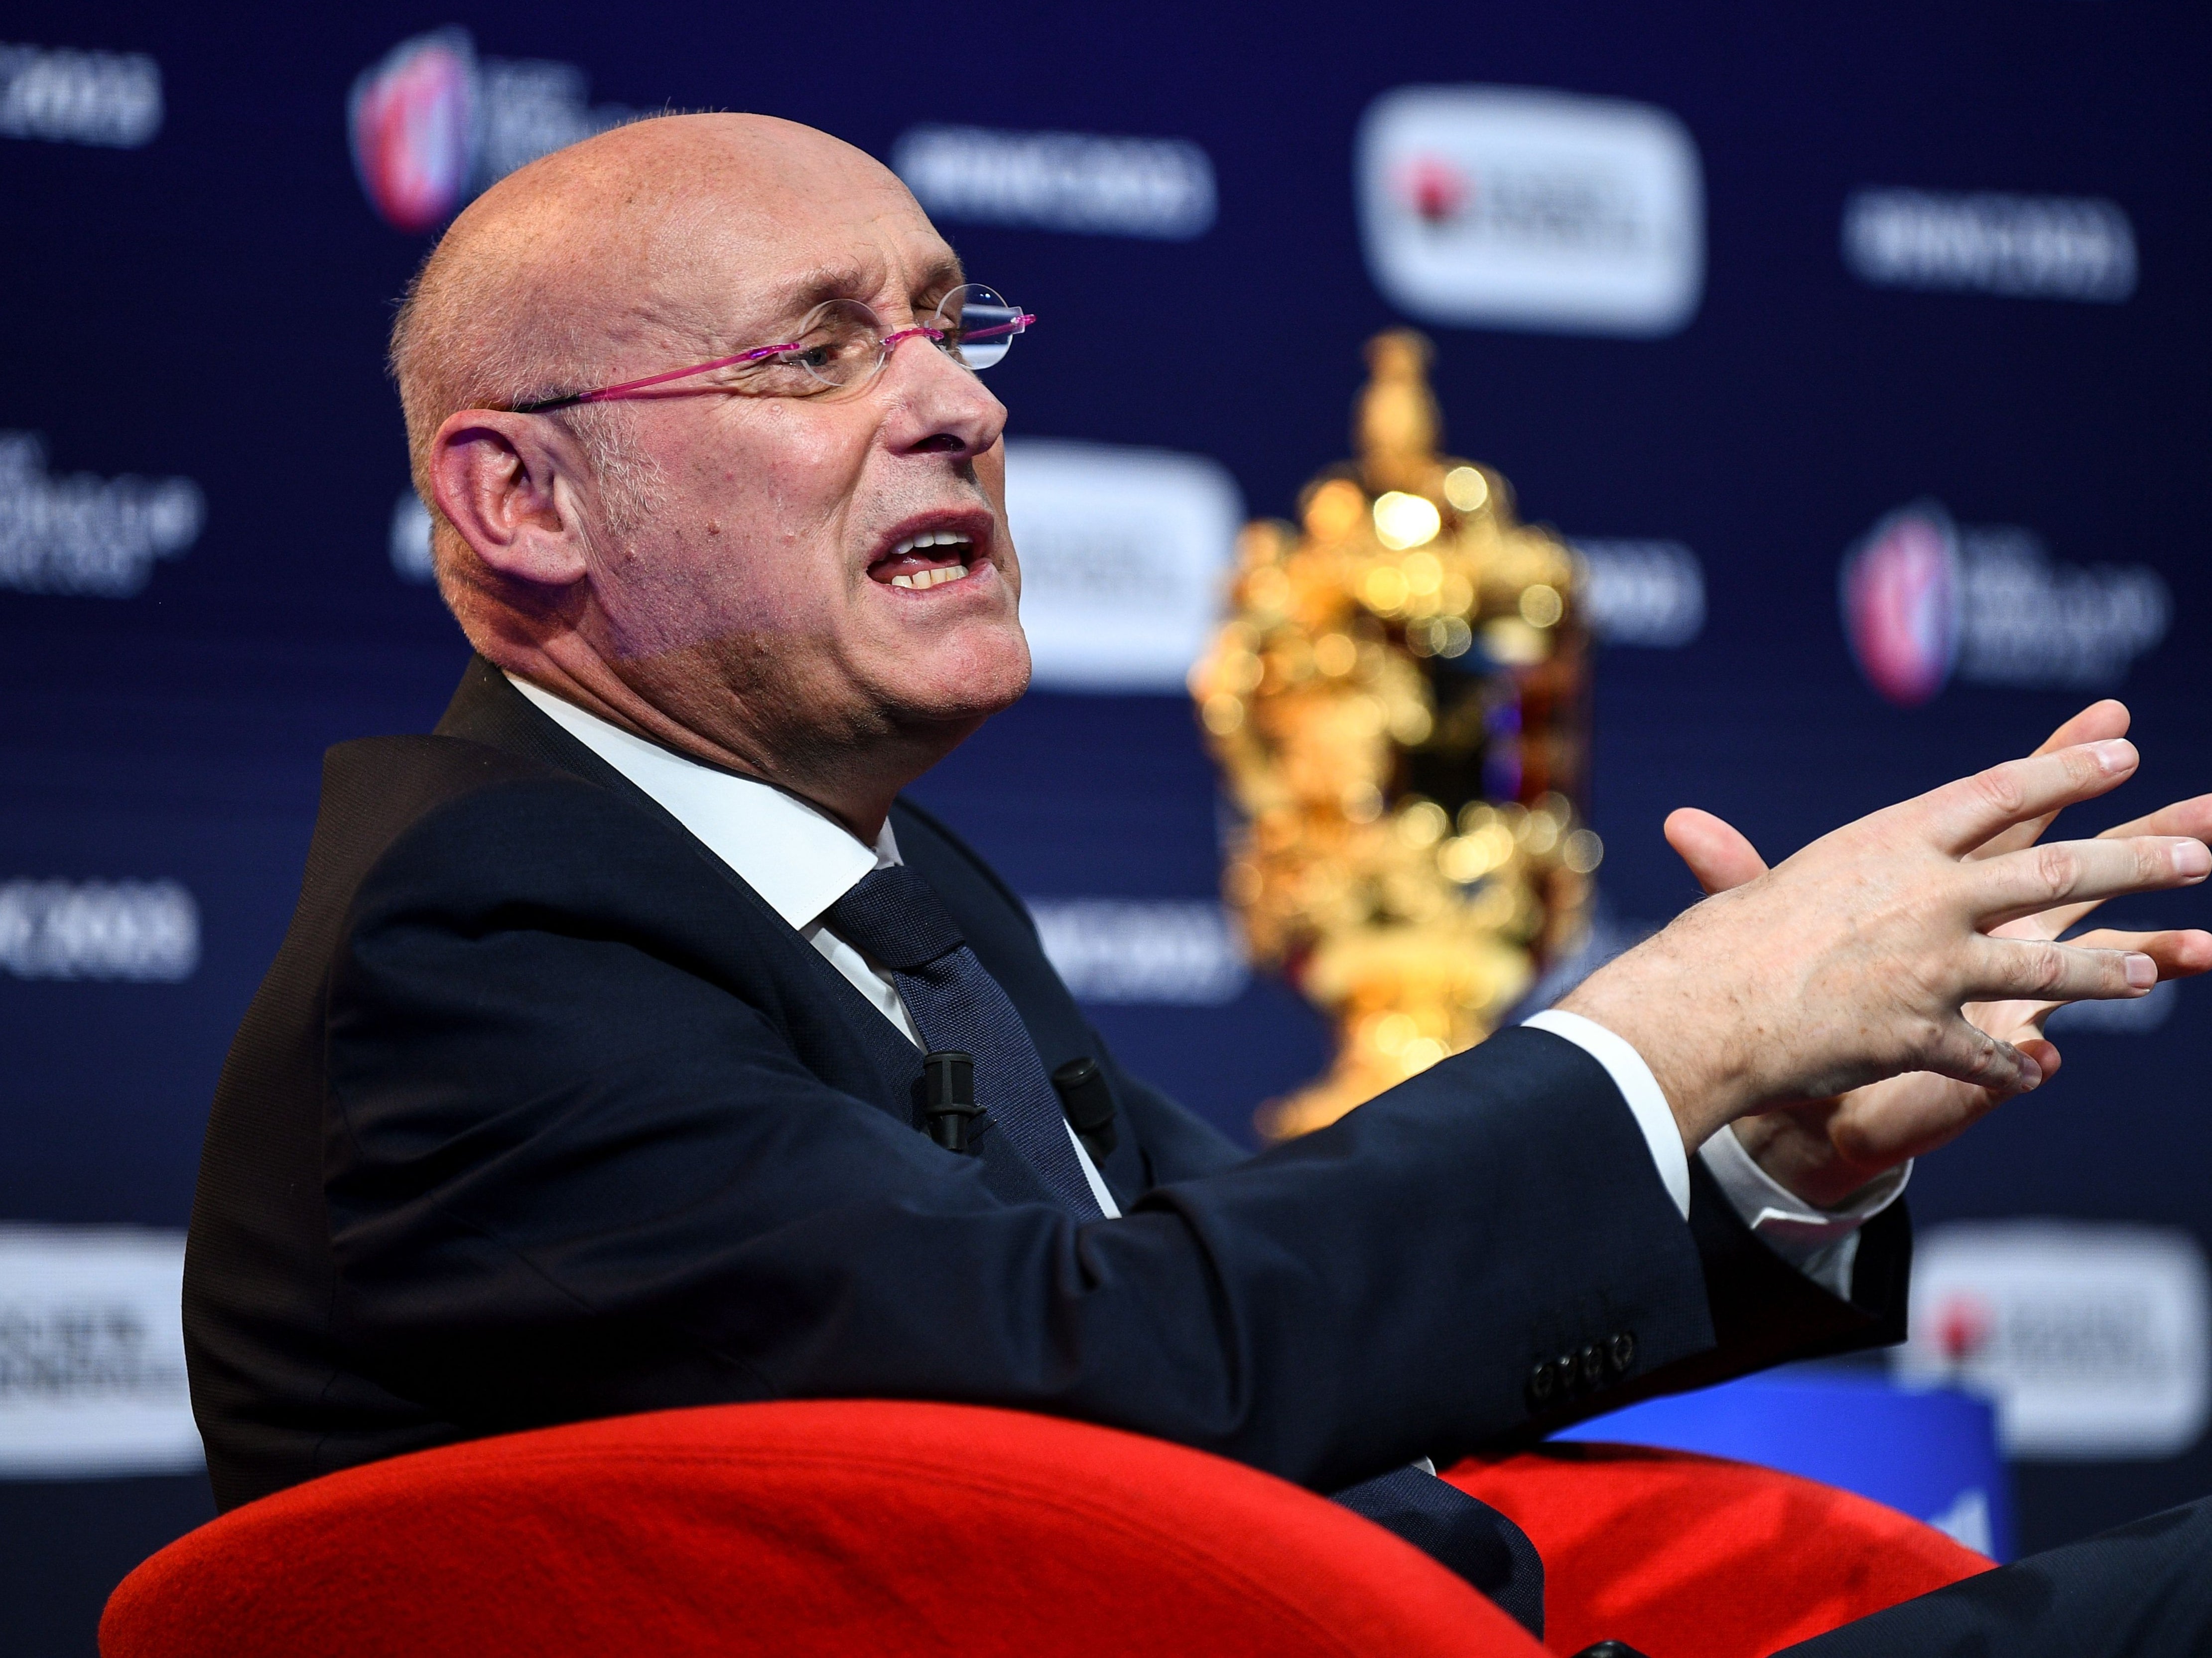 Bernard Laporte was previously vice-chair of World Rugby